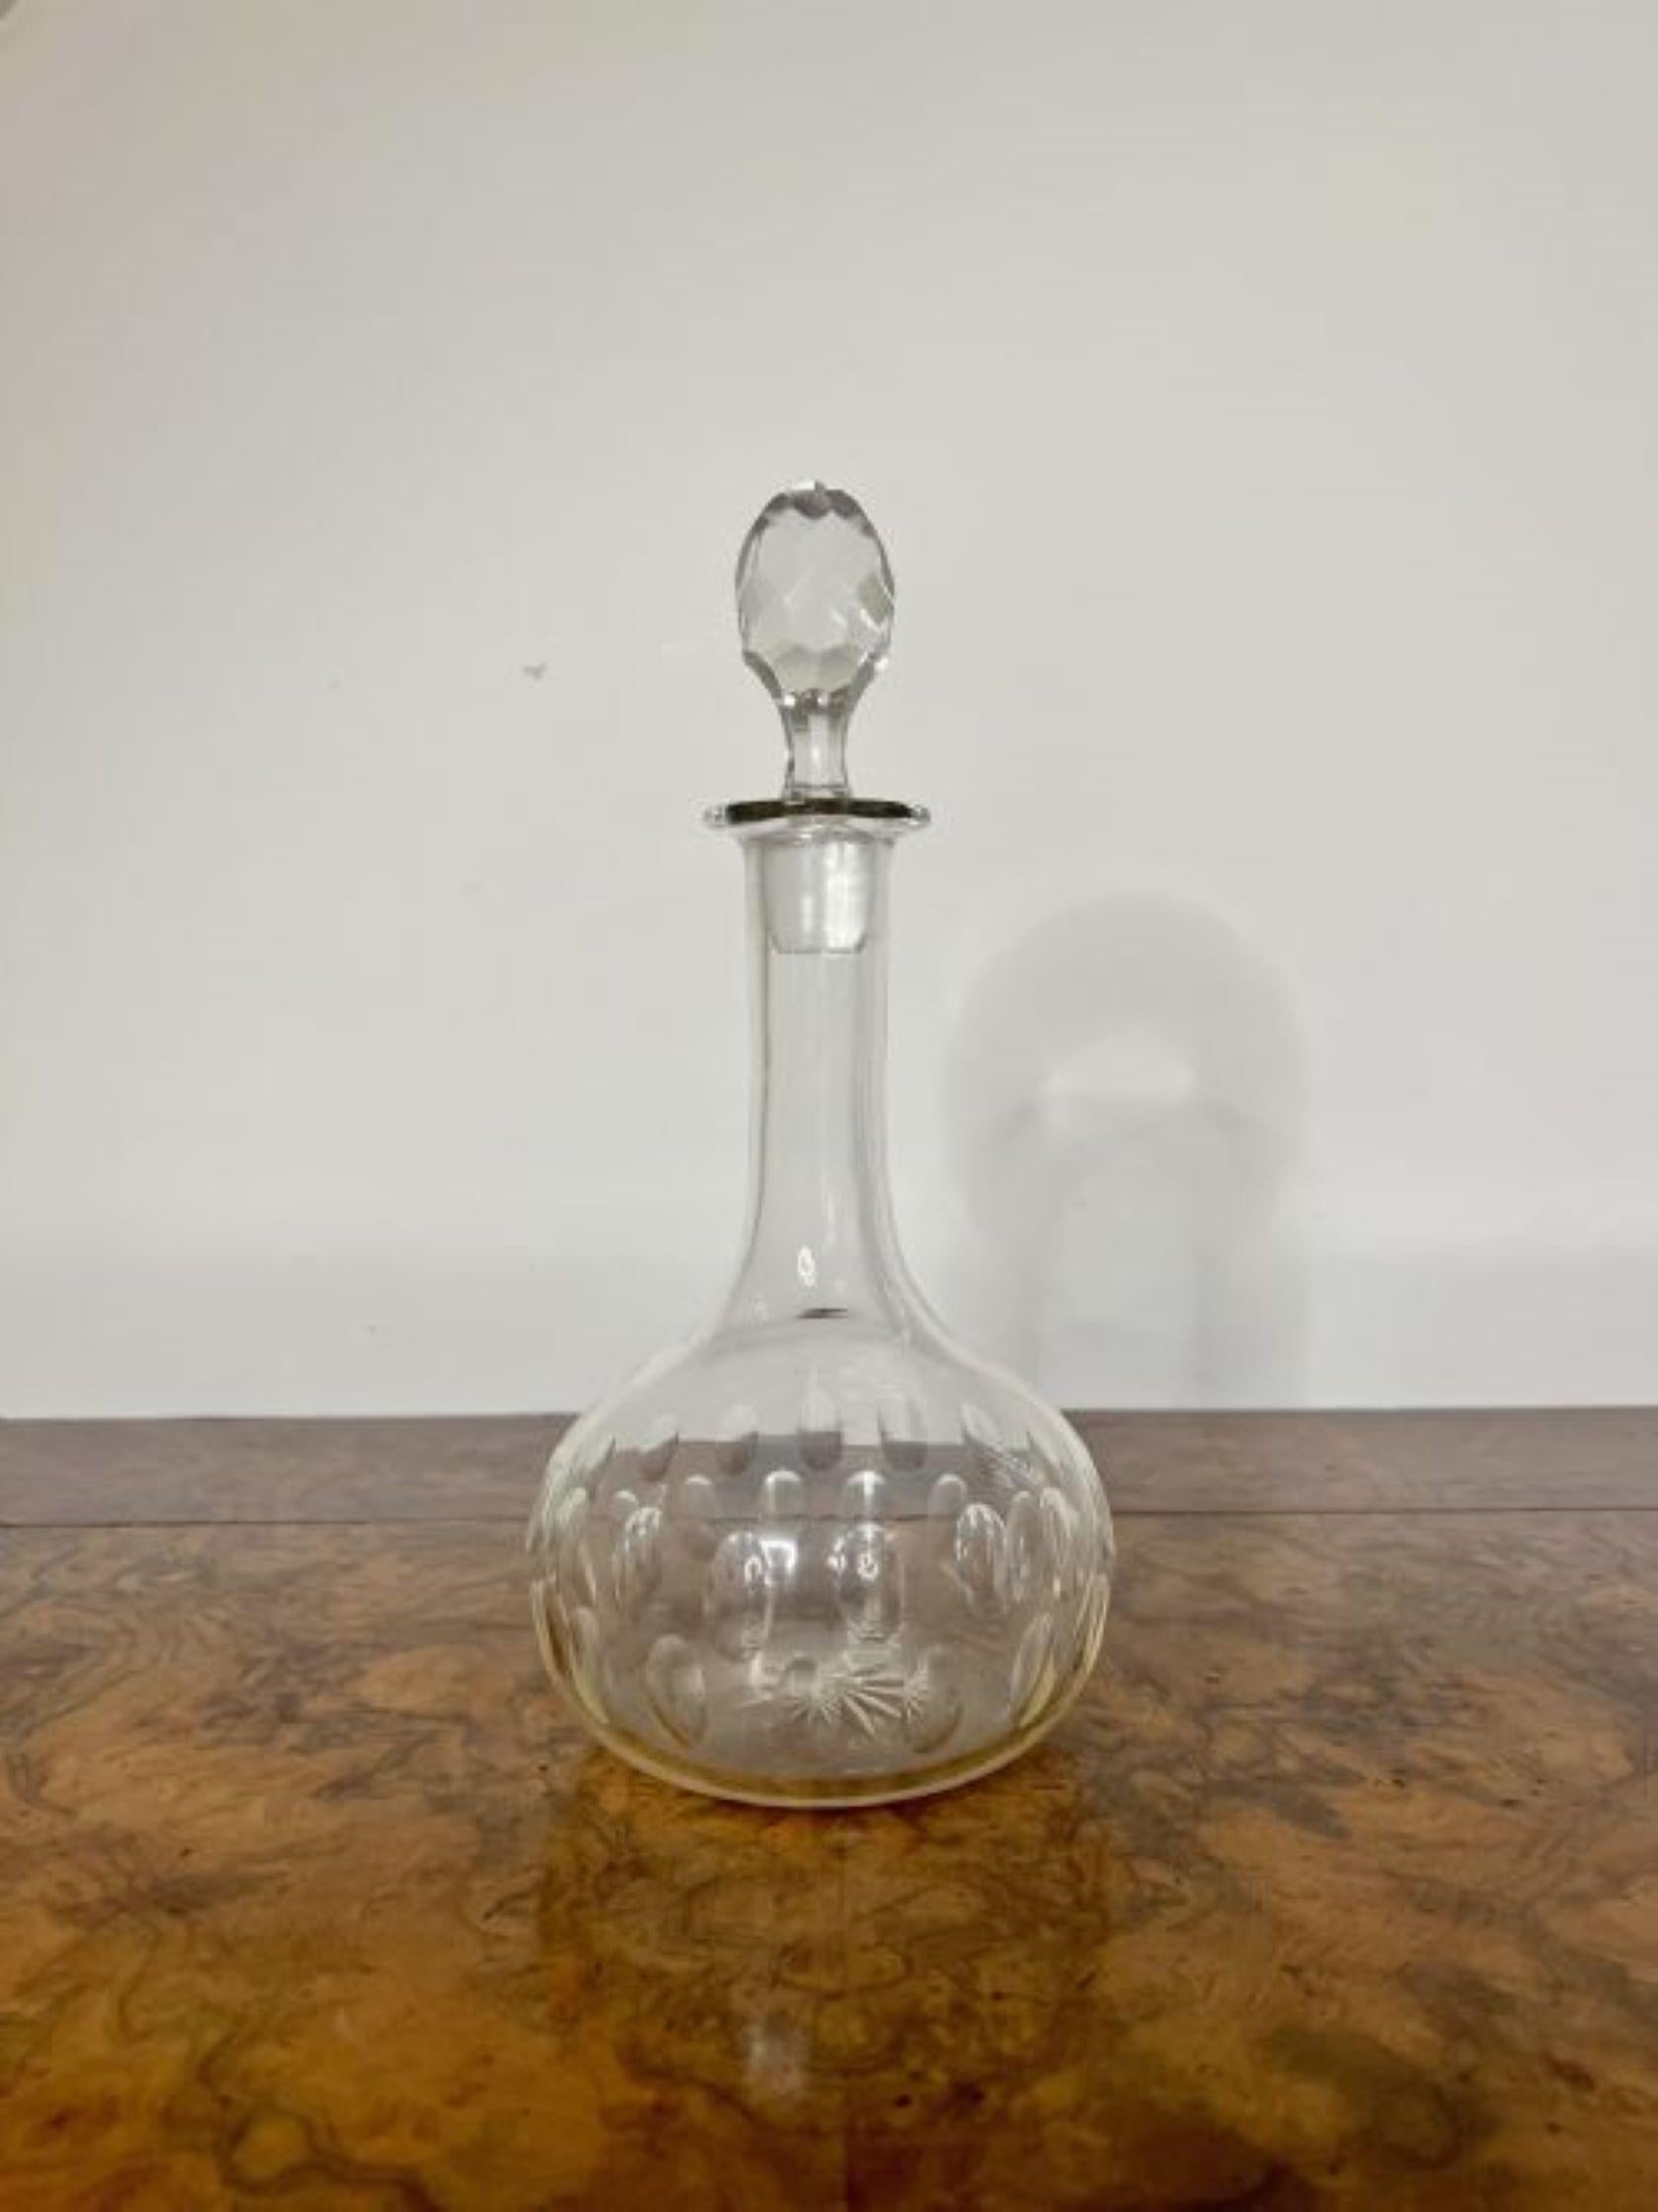 Lovely antique Edwardian glass decanter having a quality antique Edwardian glass decanter with a rounded body with circular patterns and the original cut glass stopper. 